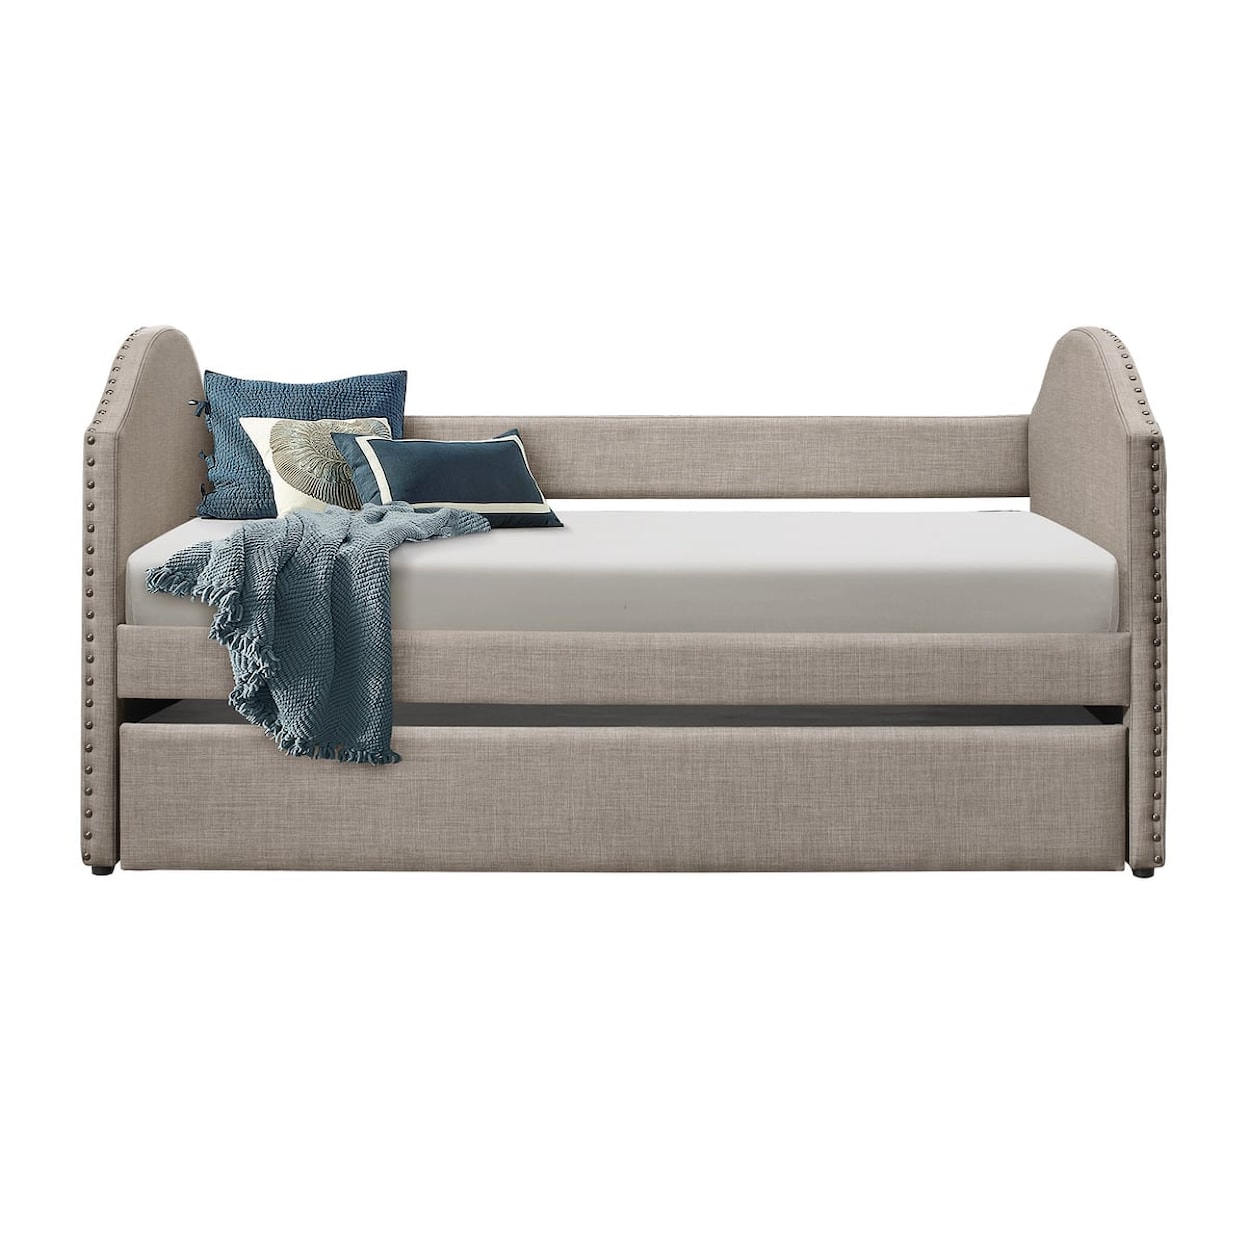 Homelegance Furniture Comfrey Daybed with Trundle